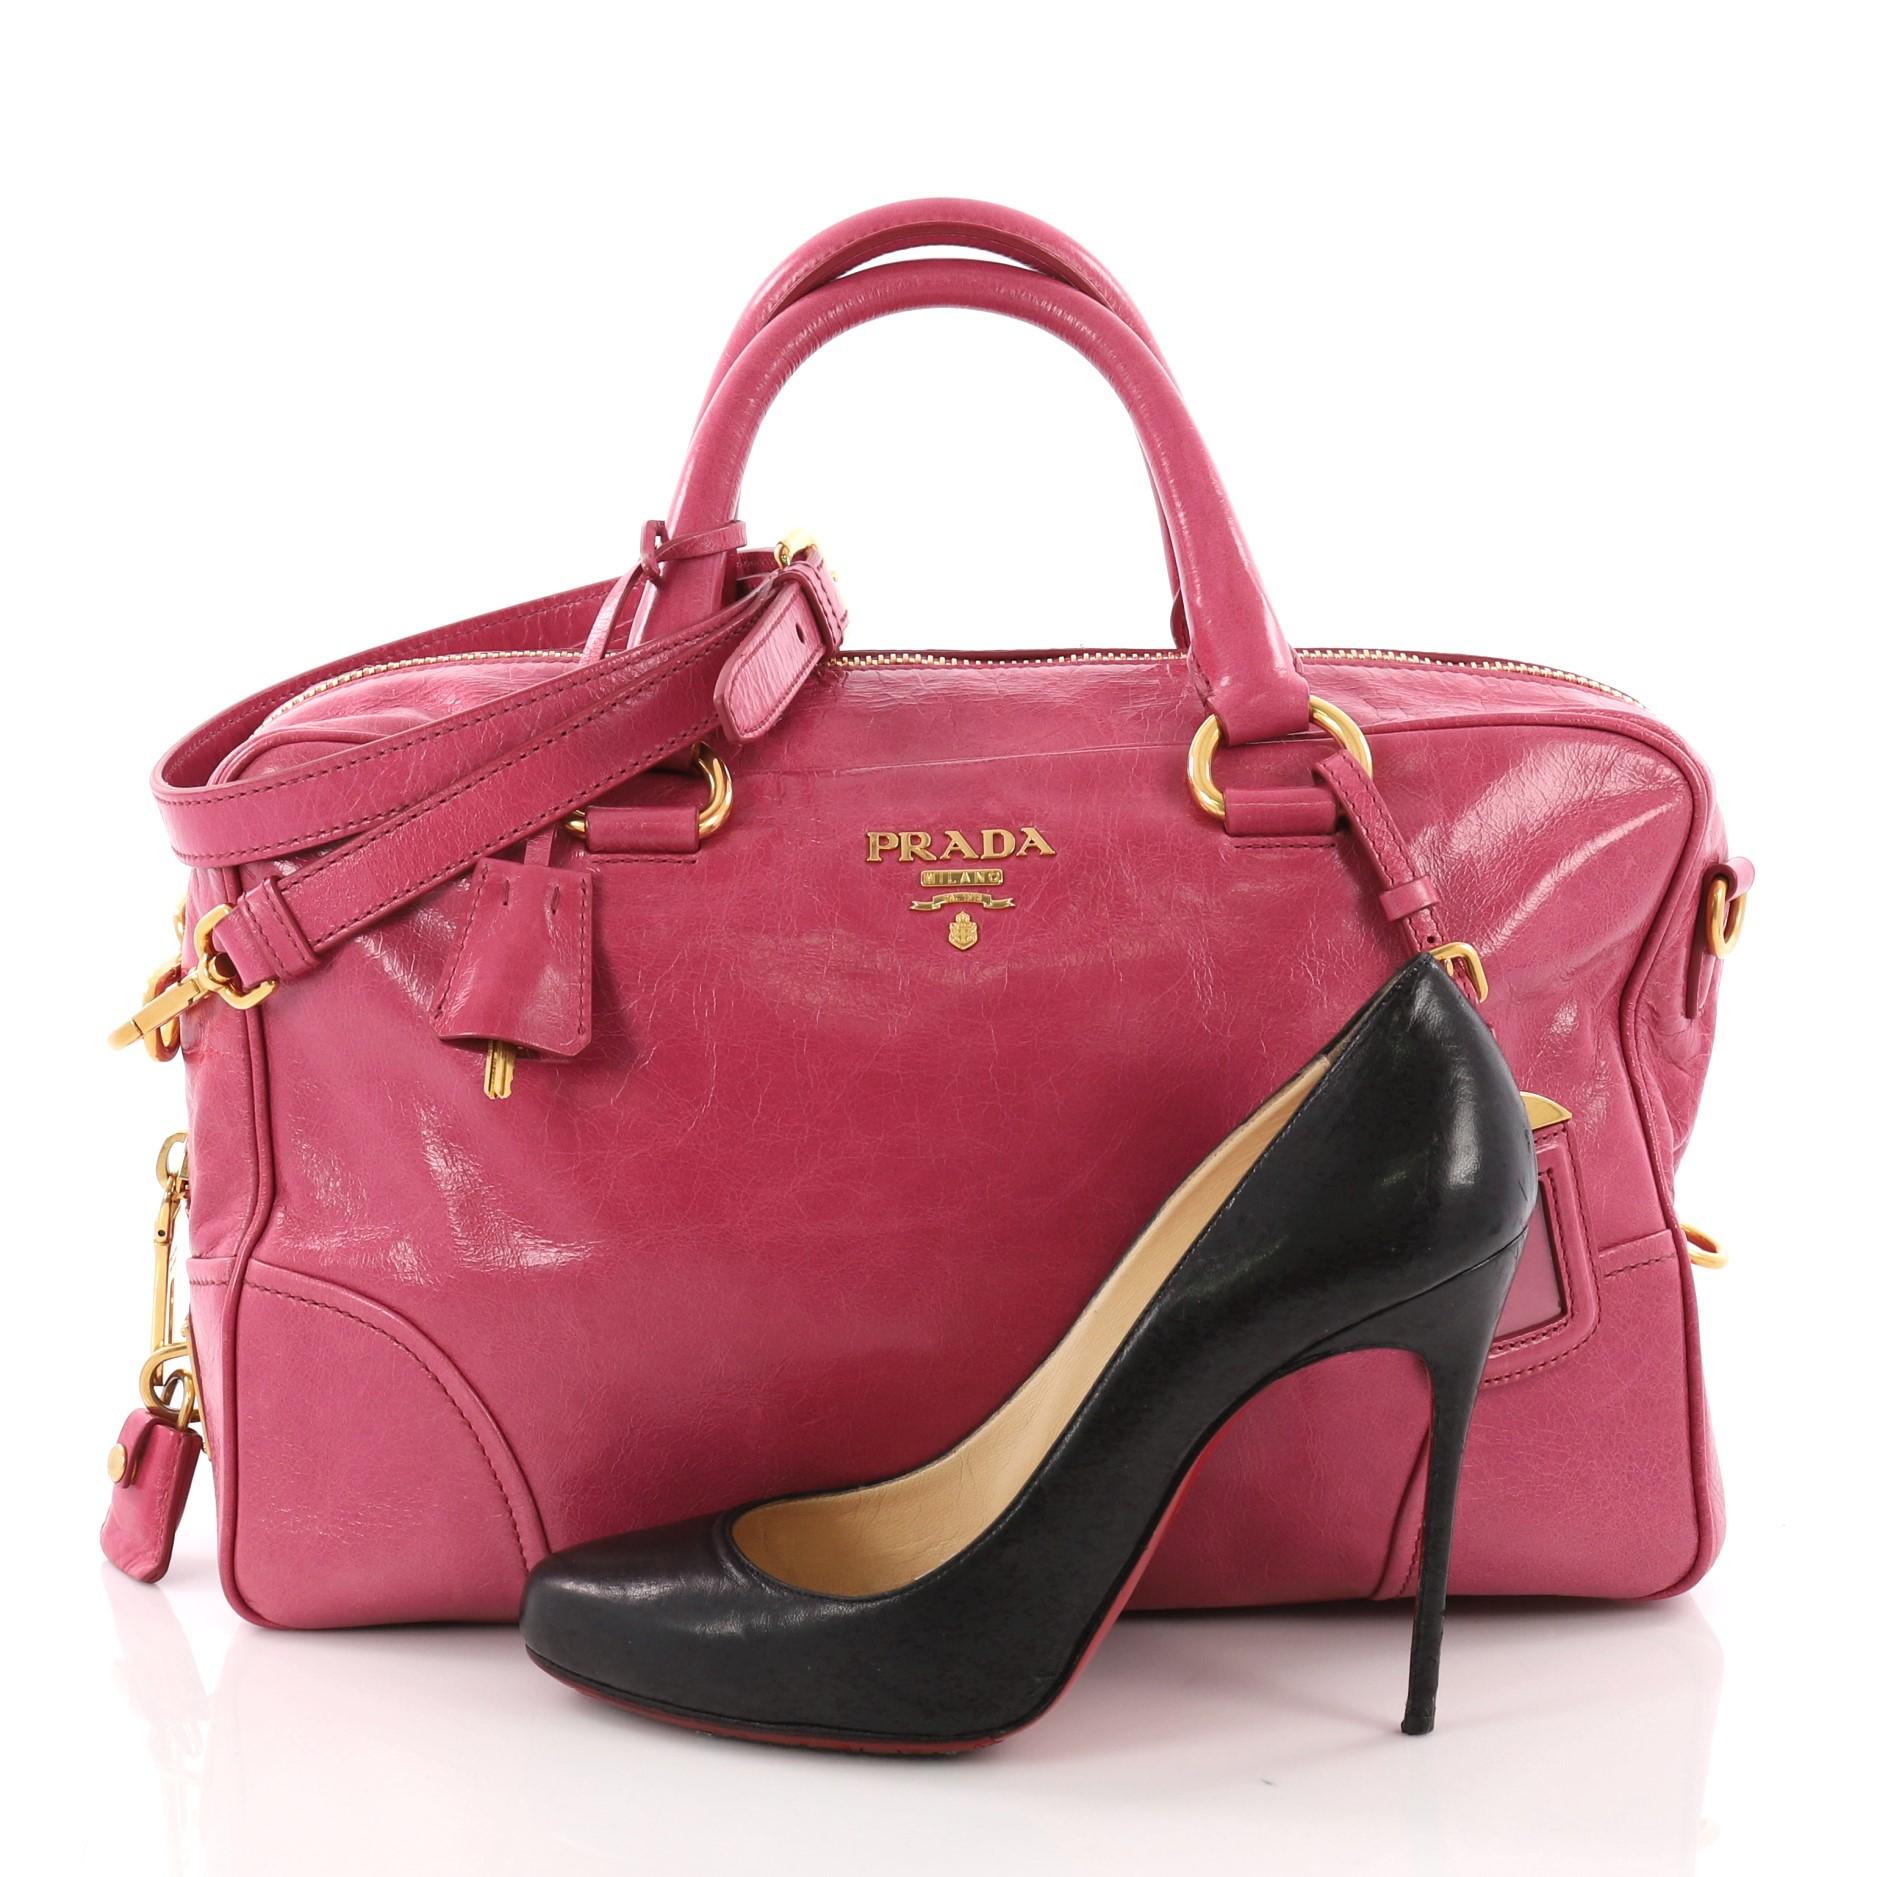 This Prada Convertible Bauletto Bag Vitello Shine Medium, crafted in pink vitello shine leather, features dual rolled leather handles, protective base studs, and gold-tone hardware. Its zip closure opens to a pink fabric interior with zip and slip